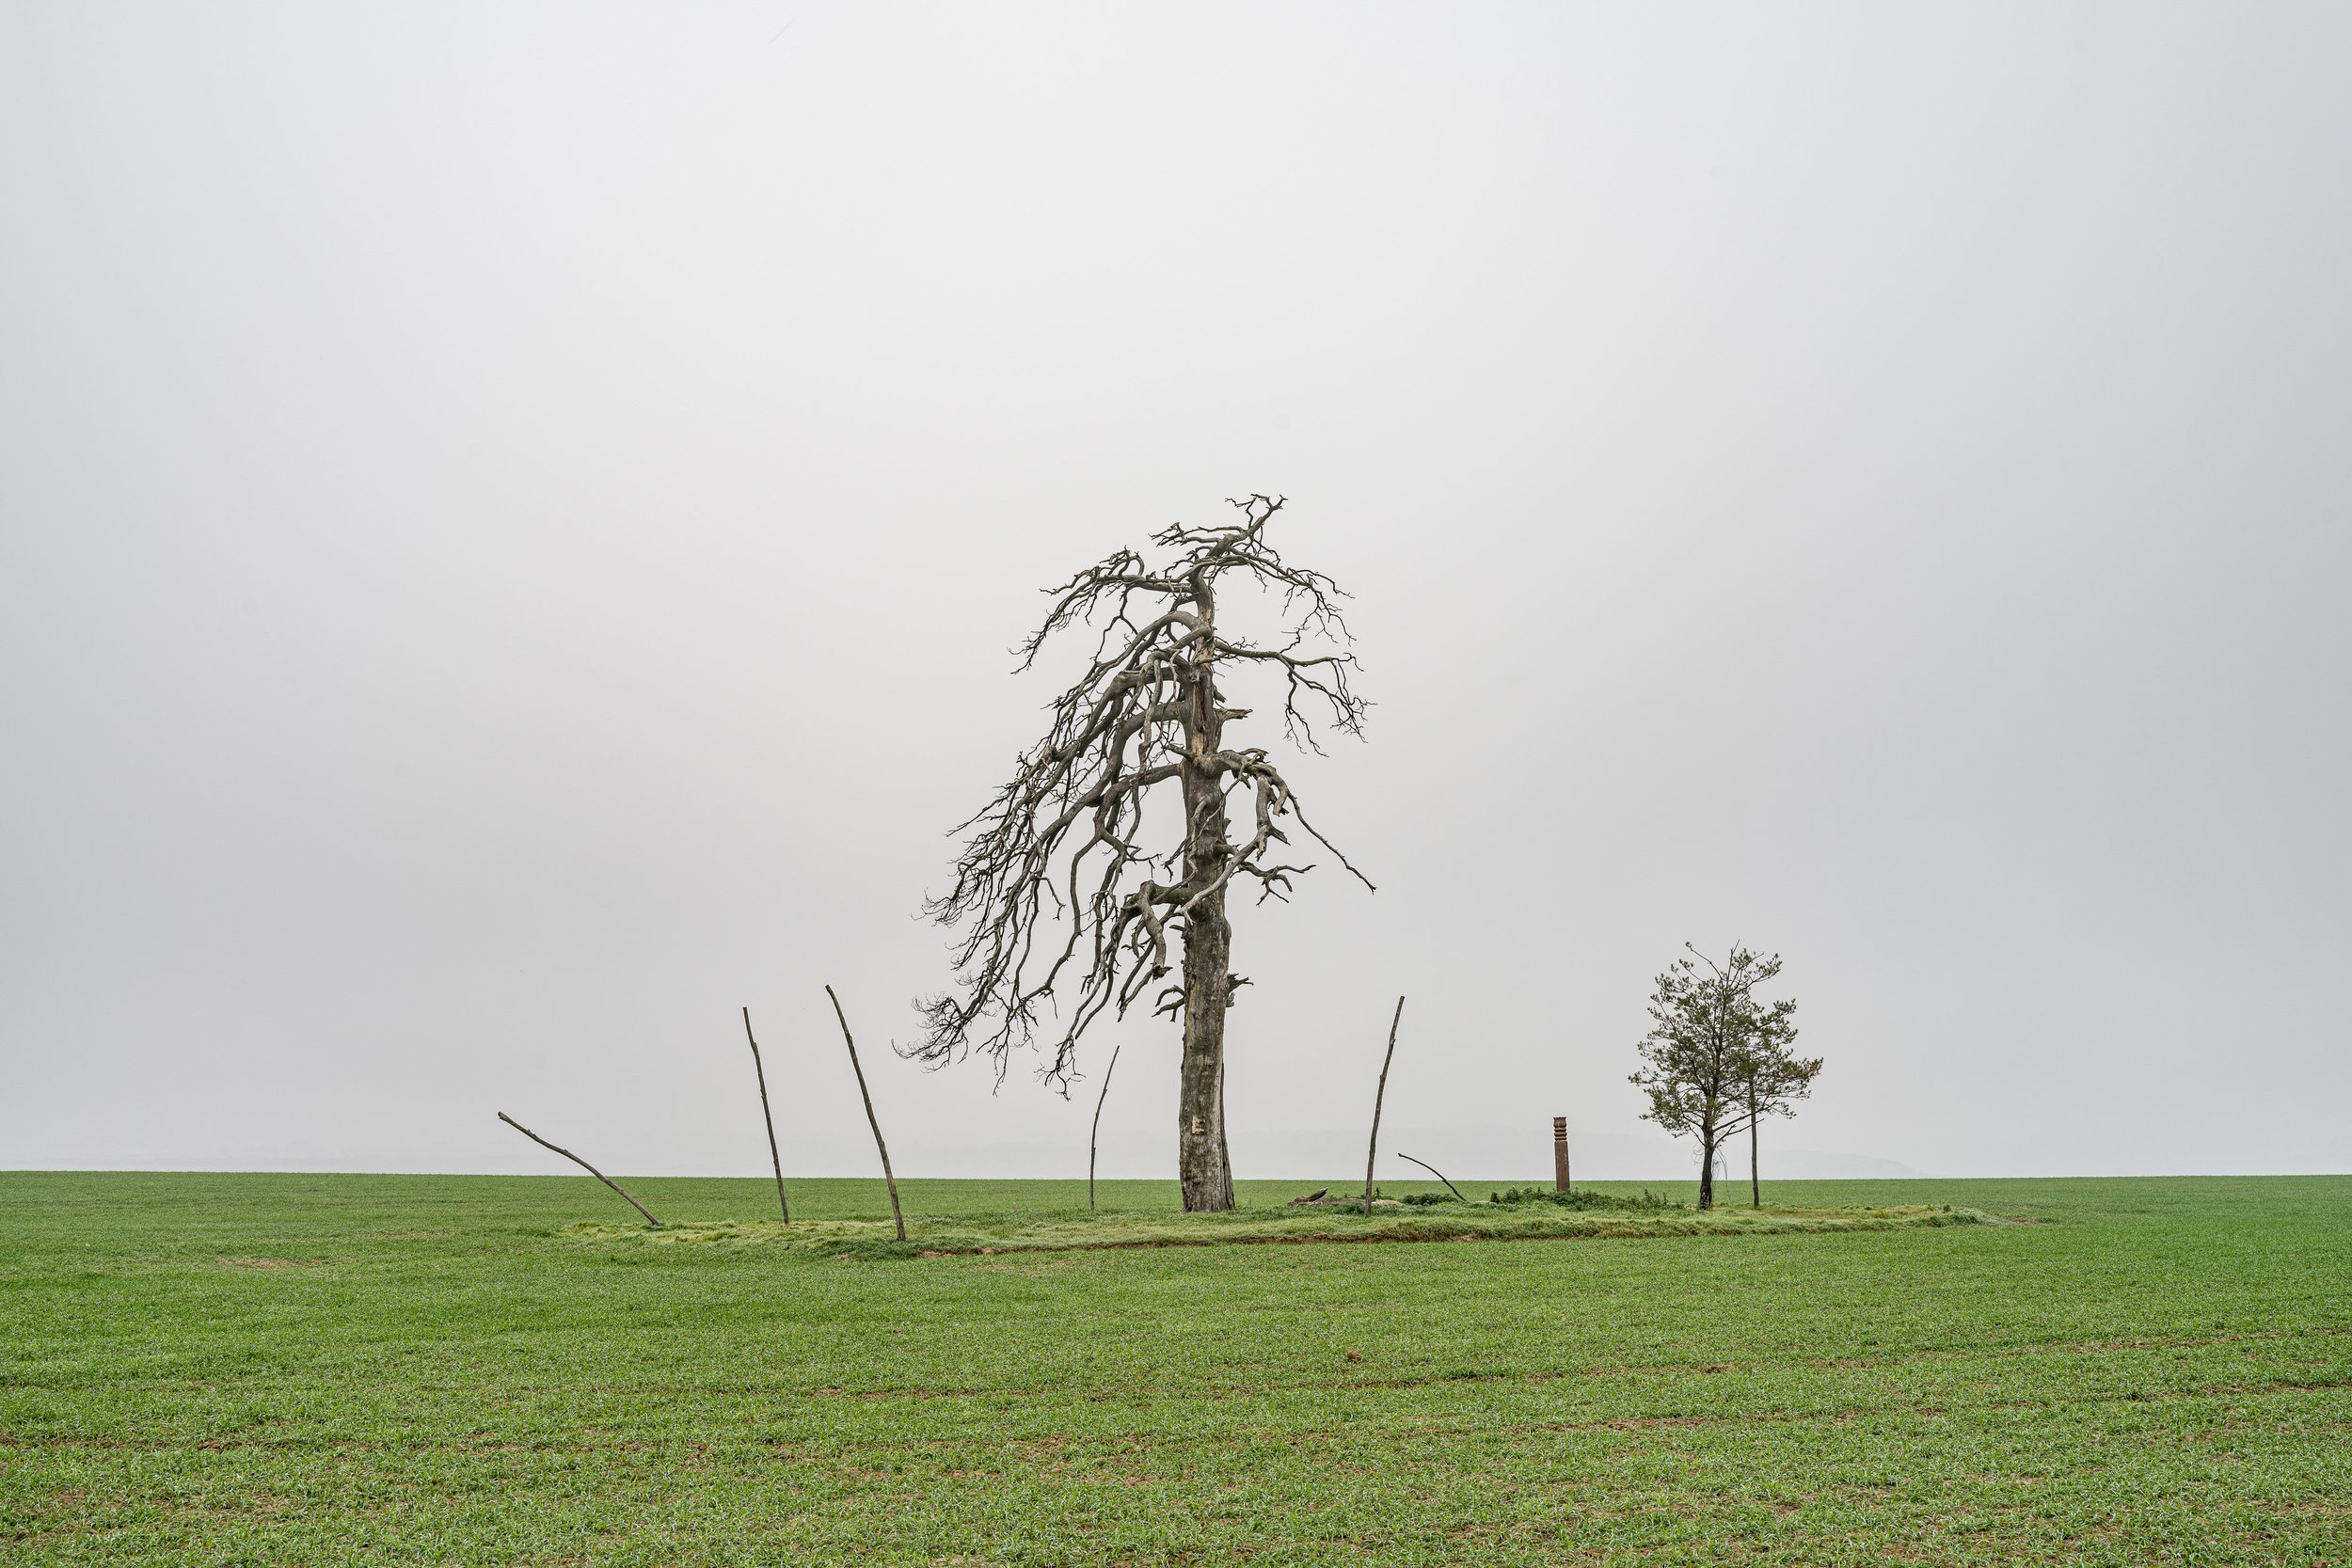  Hungary, Nyim 29. 10. 2022.                                   Dried out pine tree on agricultural land. It was about 160-200 years old when it died probably because loss of water.              Photo: Márton Kállai / NOOR 